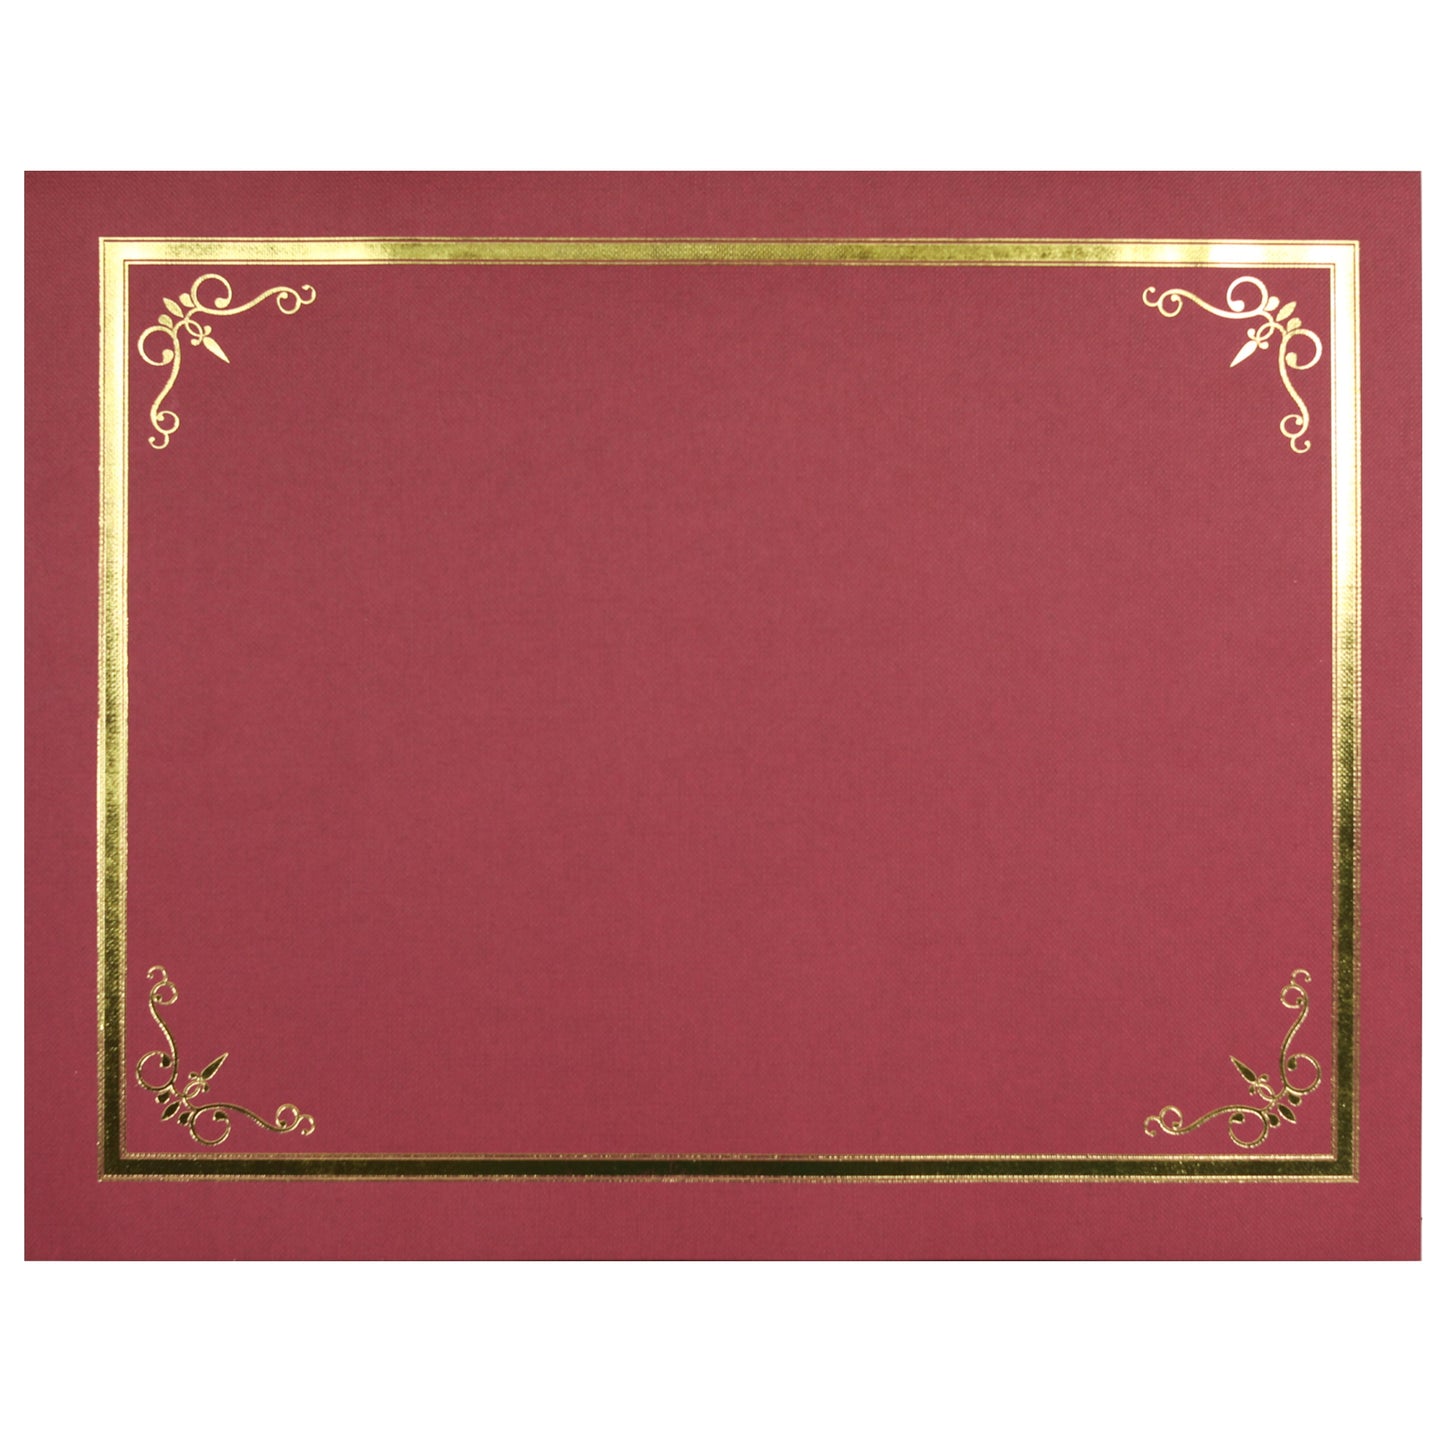 St. James® Certificate Holders/Document Covers/Diploma Holders, Red, Gold Foil Border, Linen Finish, Pack of 5, 83807